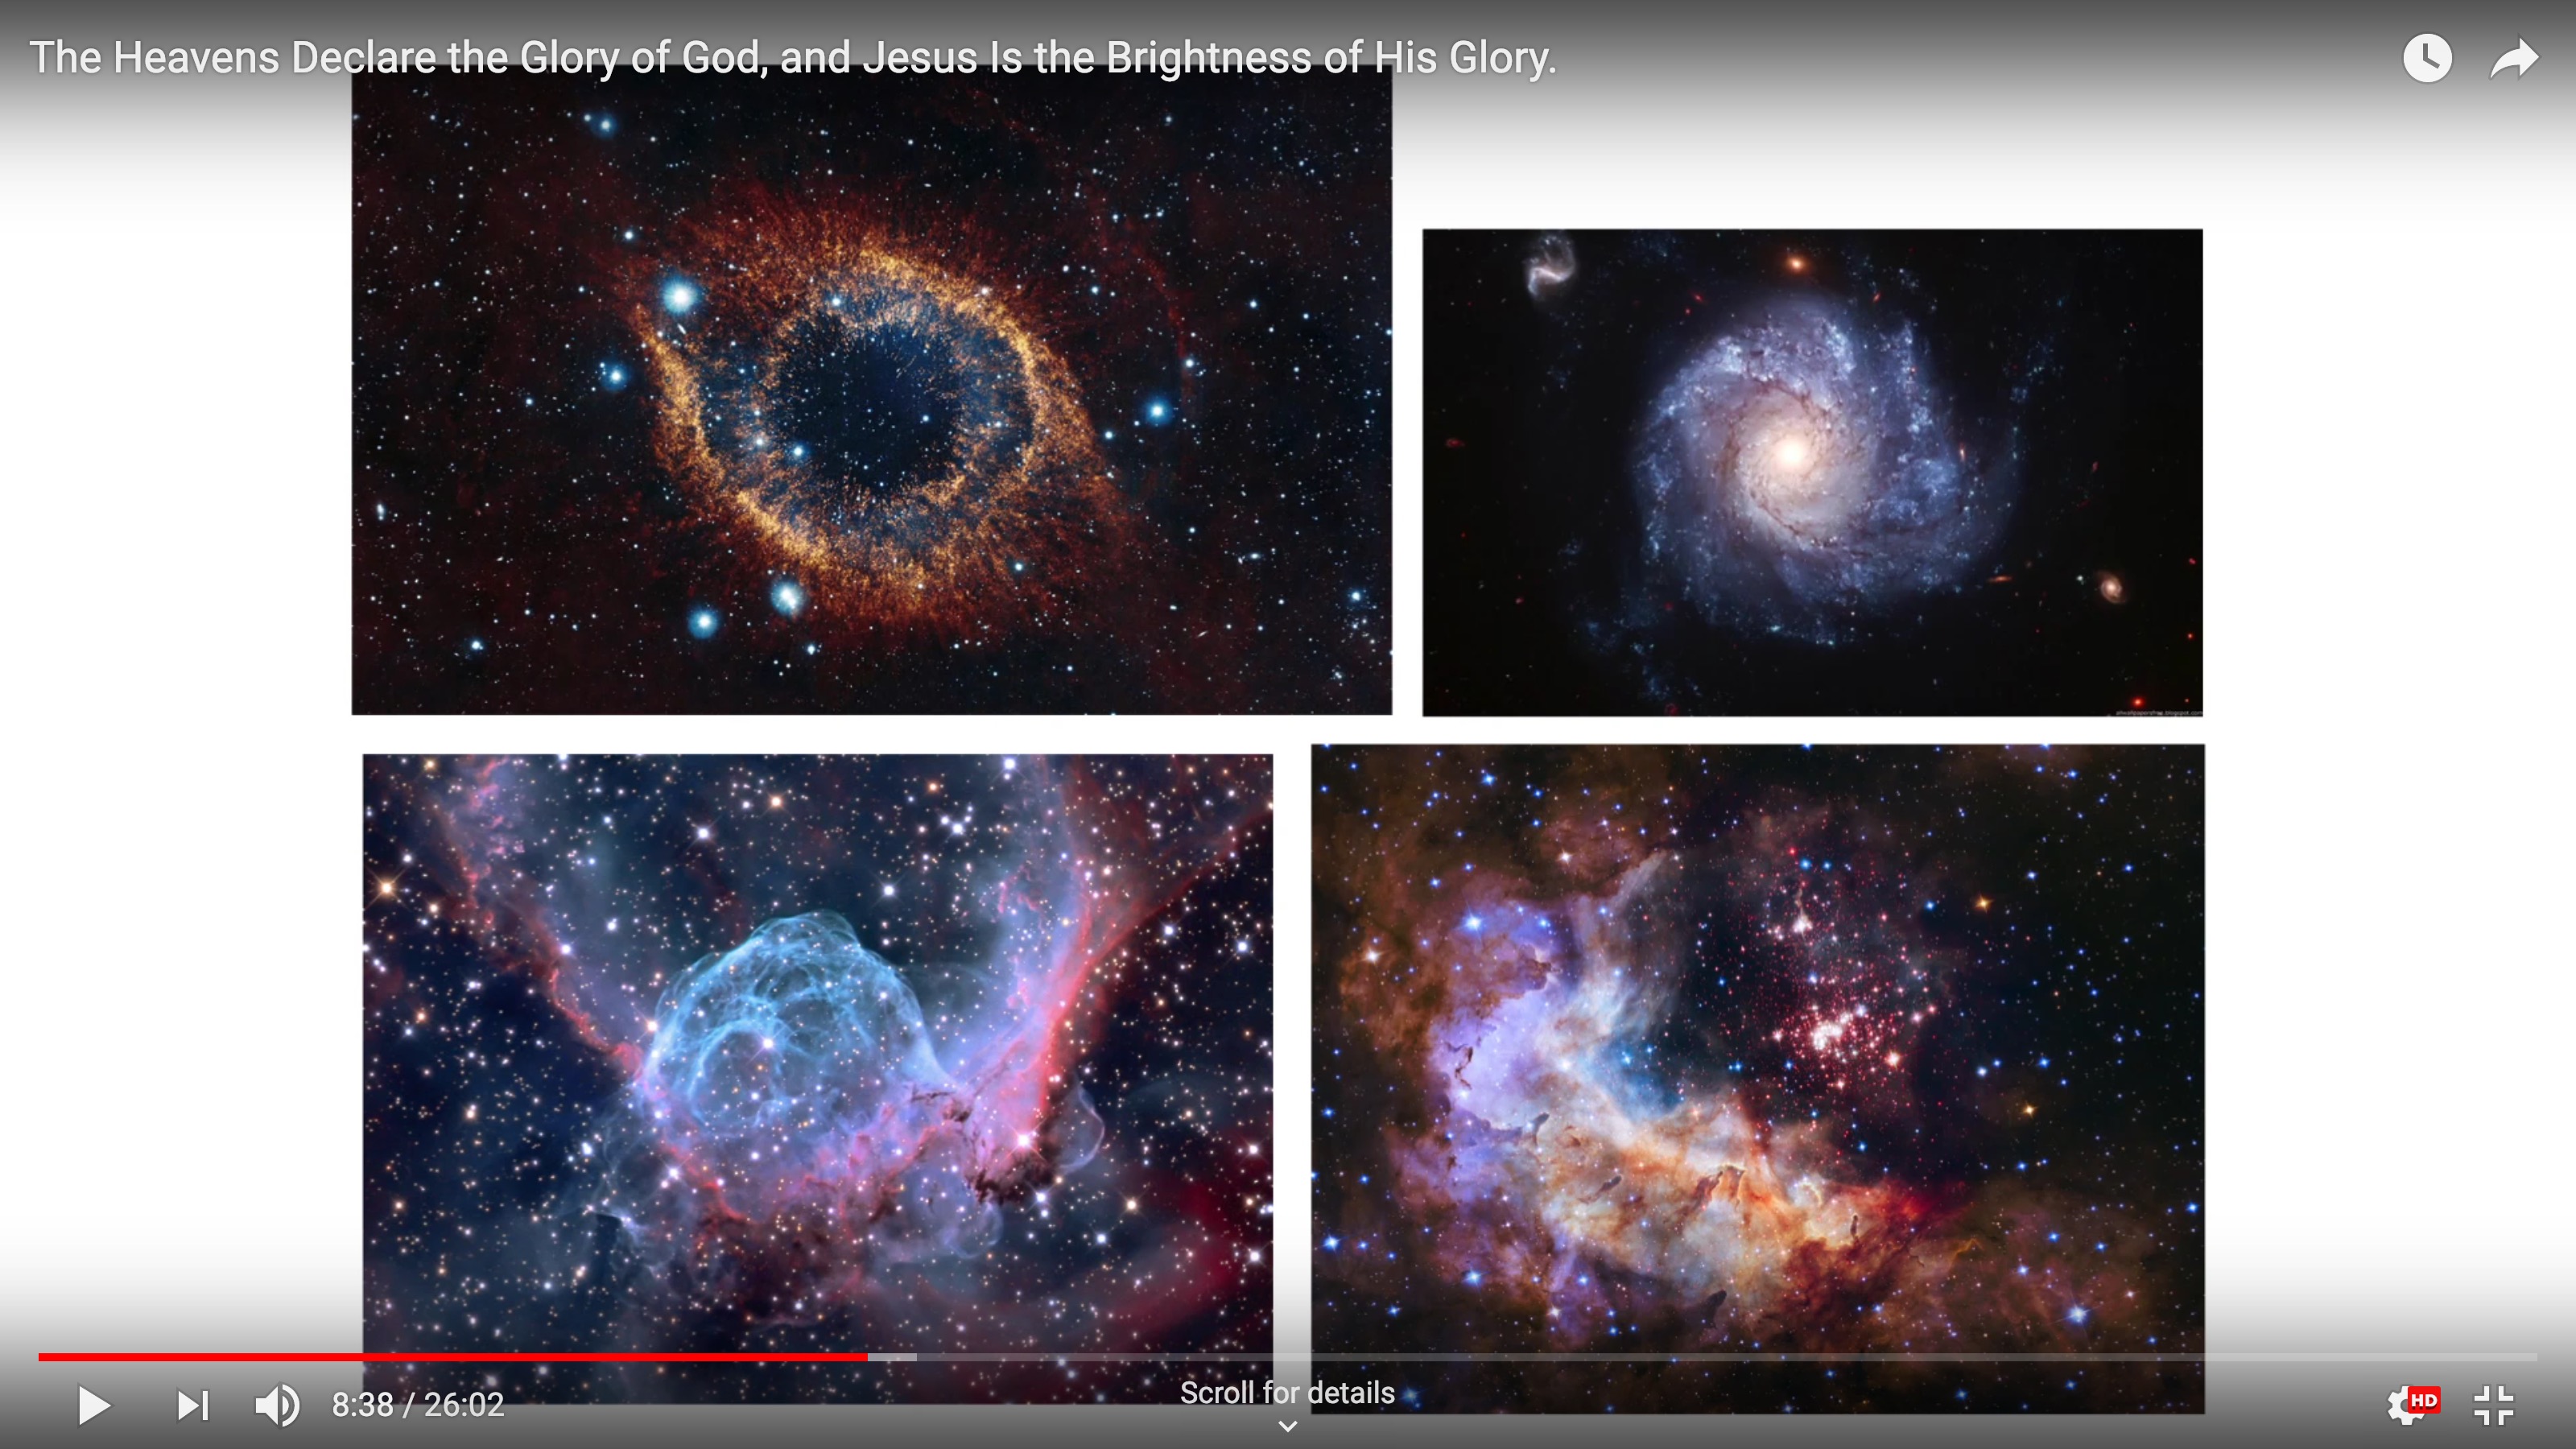 The Heavens Declare the Glory of God, and Jesus is the Brightness of His Glory